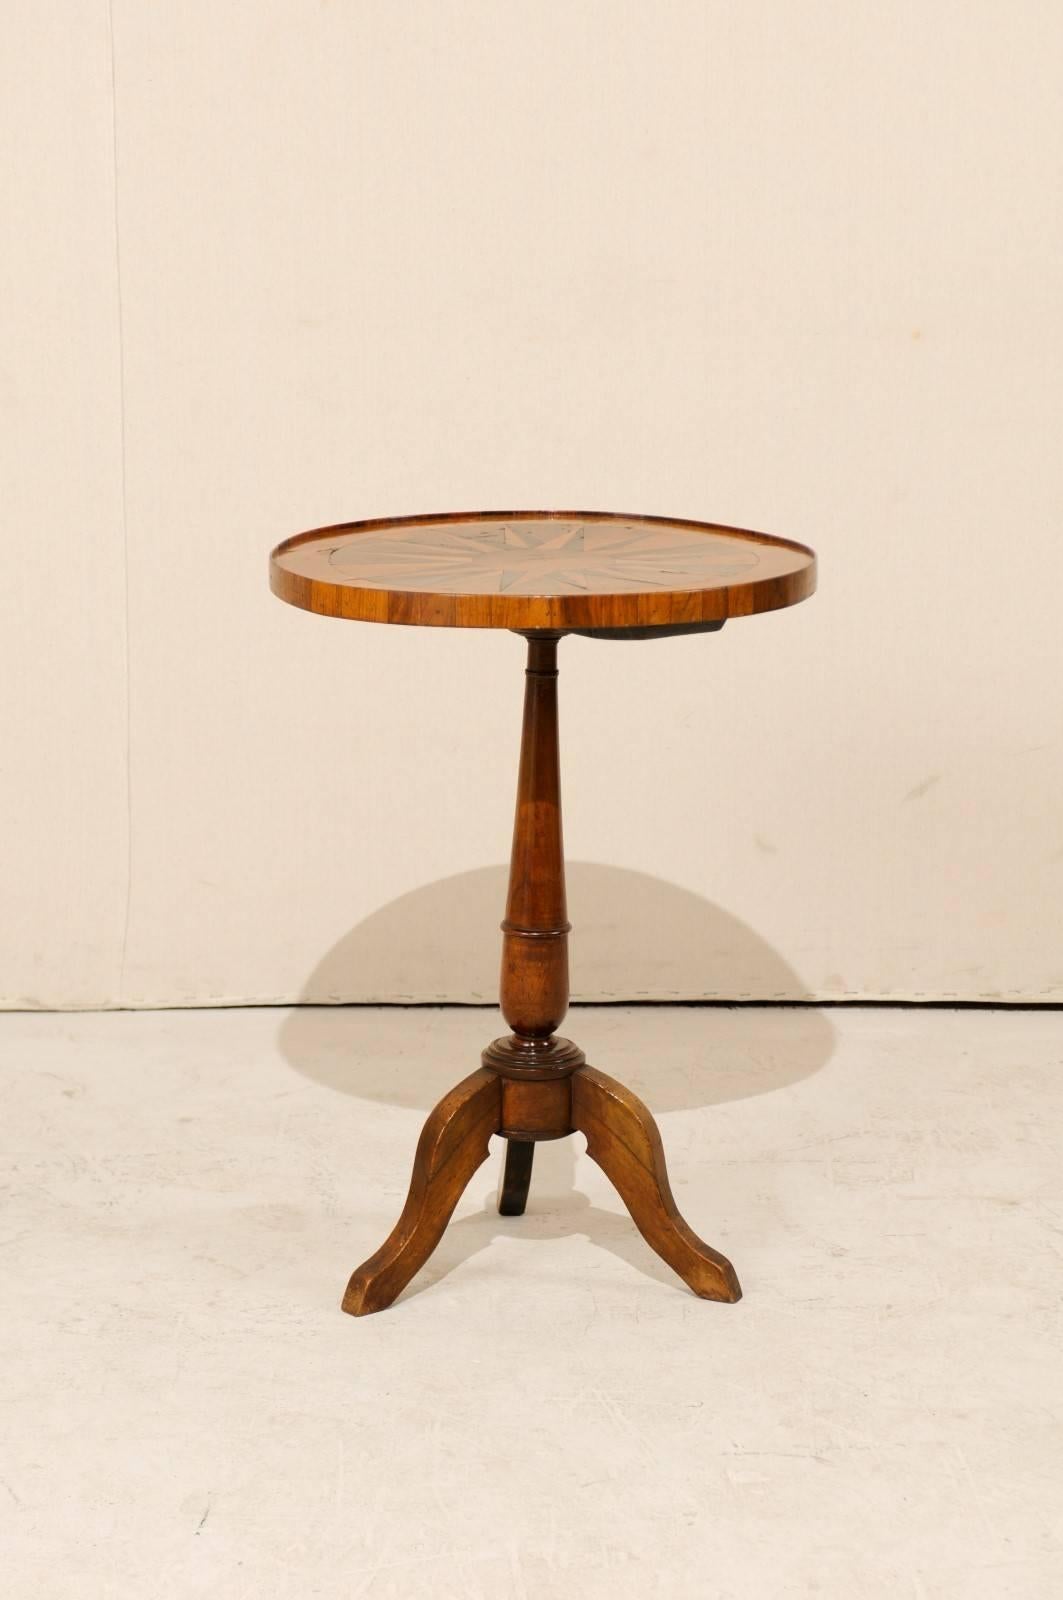 An Italian 19th century round pedestal table. This Italian pedestal table of stained fruitwood features a lovely compass star-shaped inlaid top of walnut and satin wood. The table rests on a central pedestal column and tripod feet. This 19th century